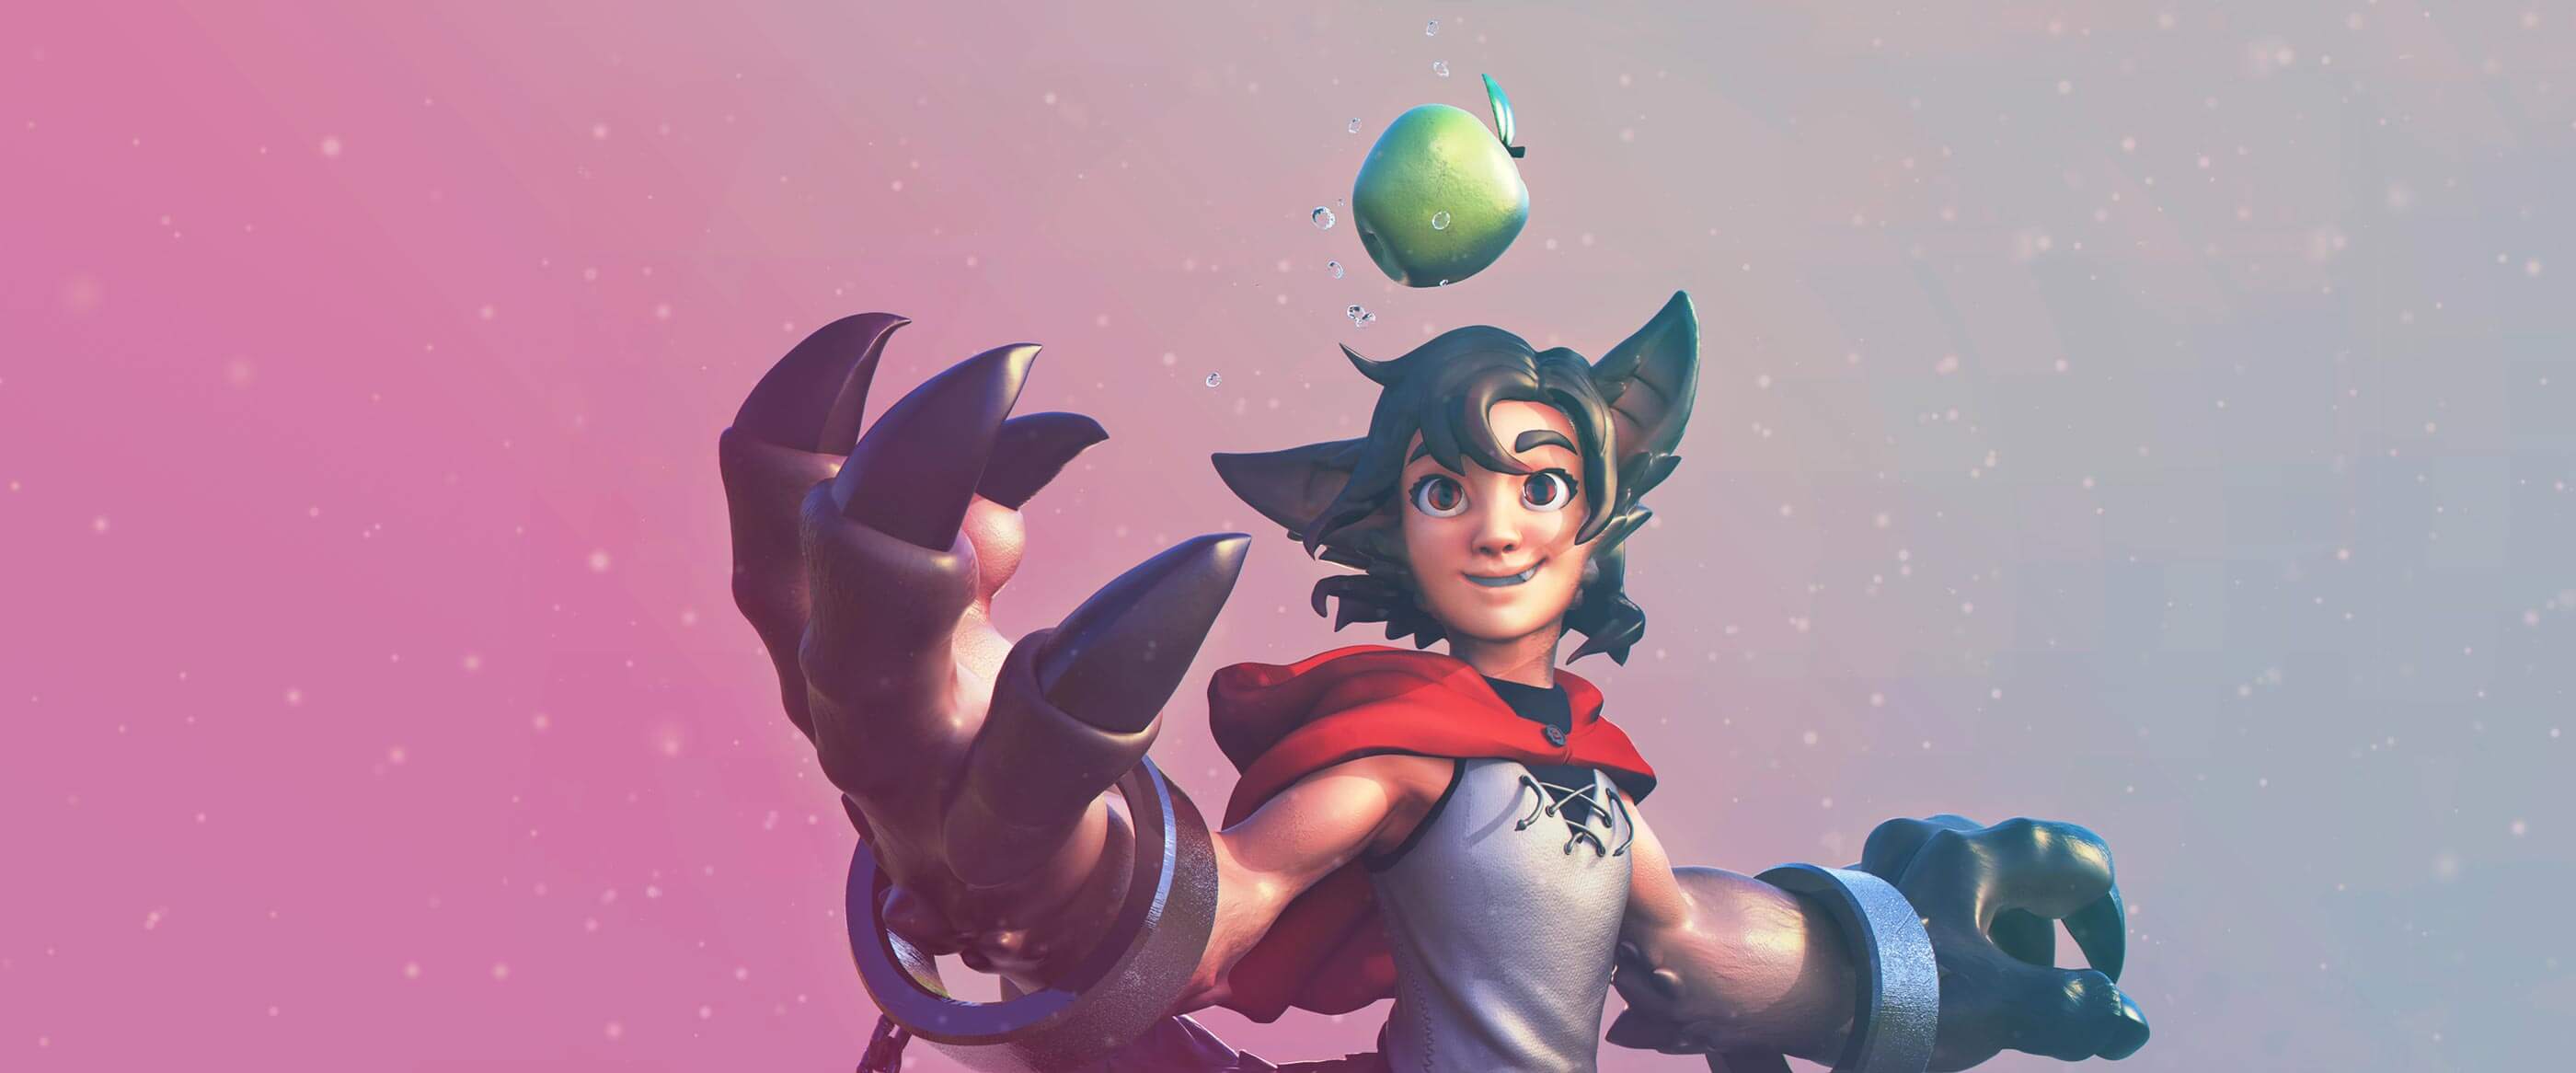 A 3D model of a boy with wolf features throwing an apple into the air.